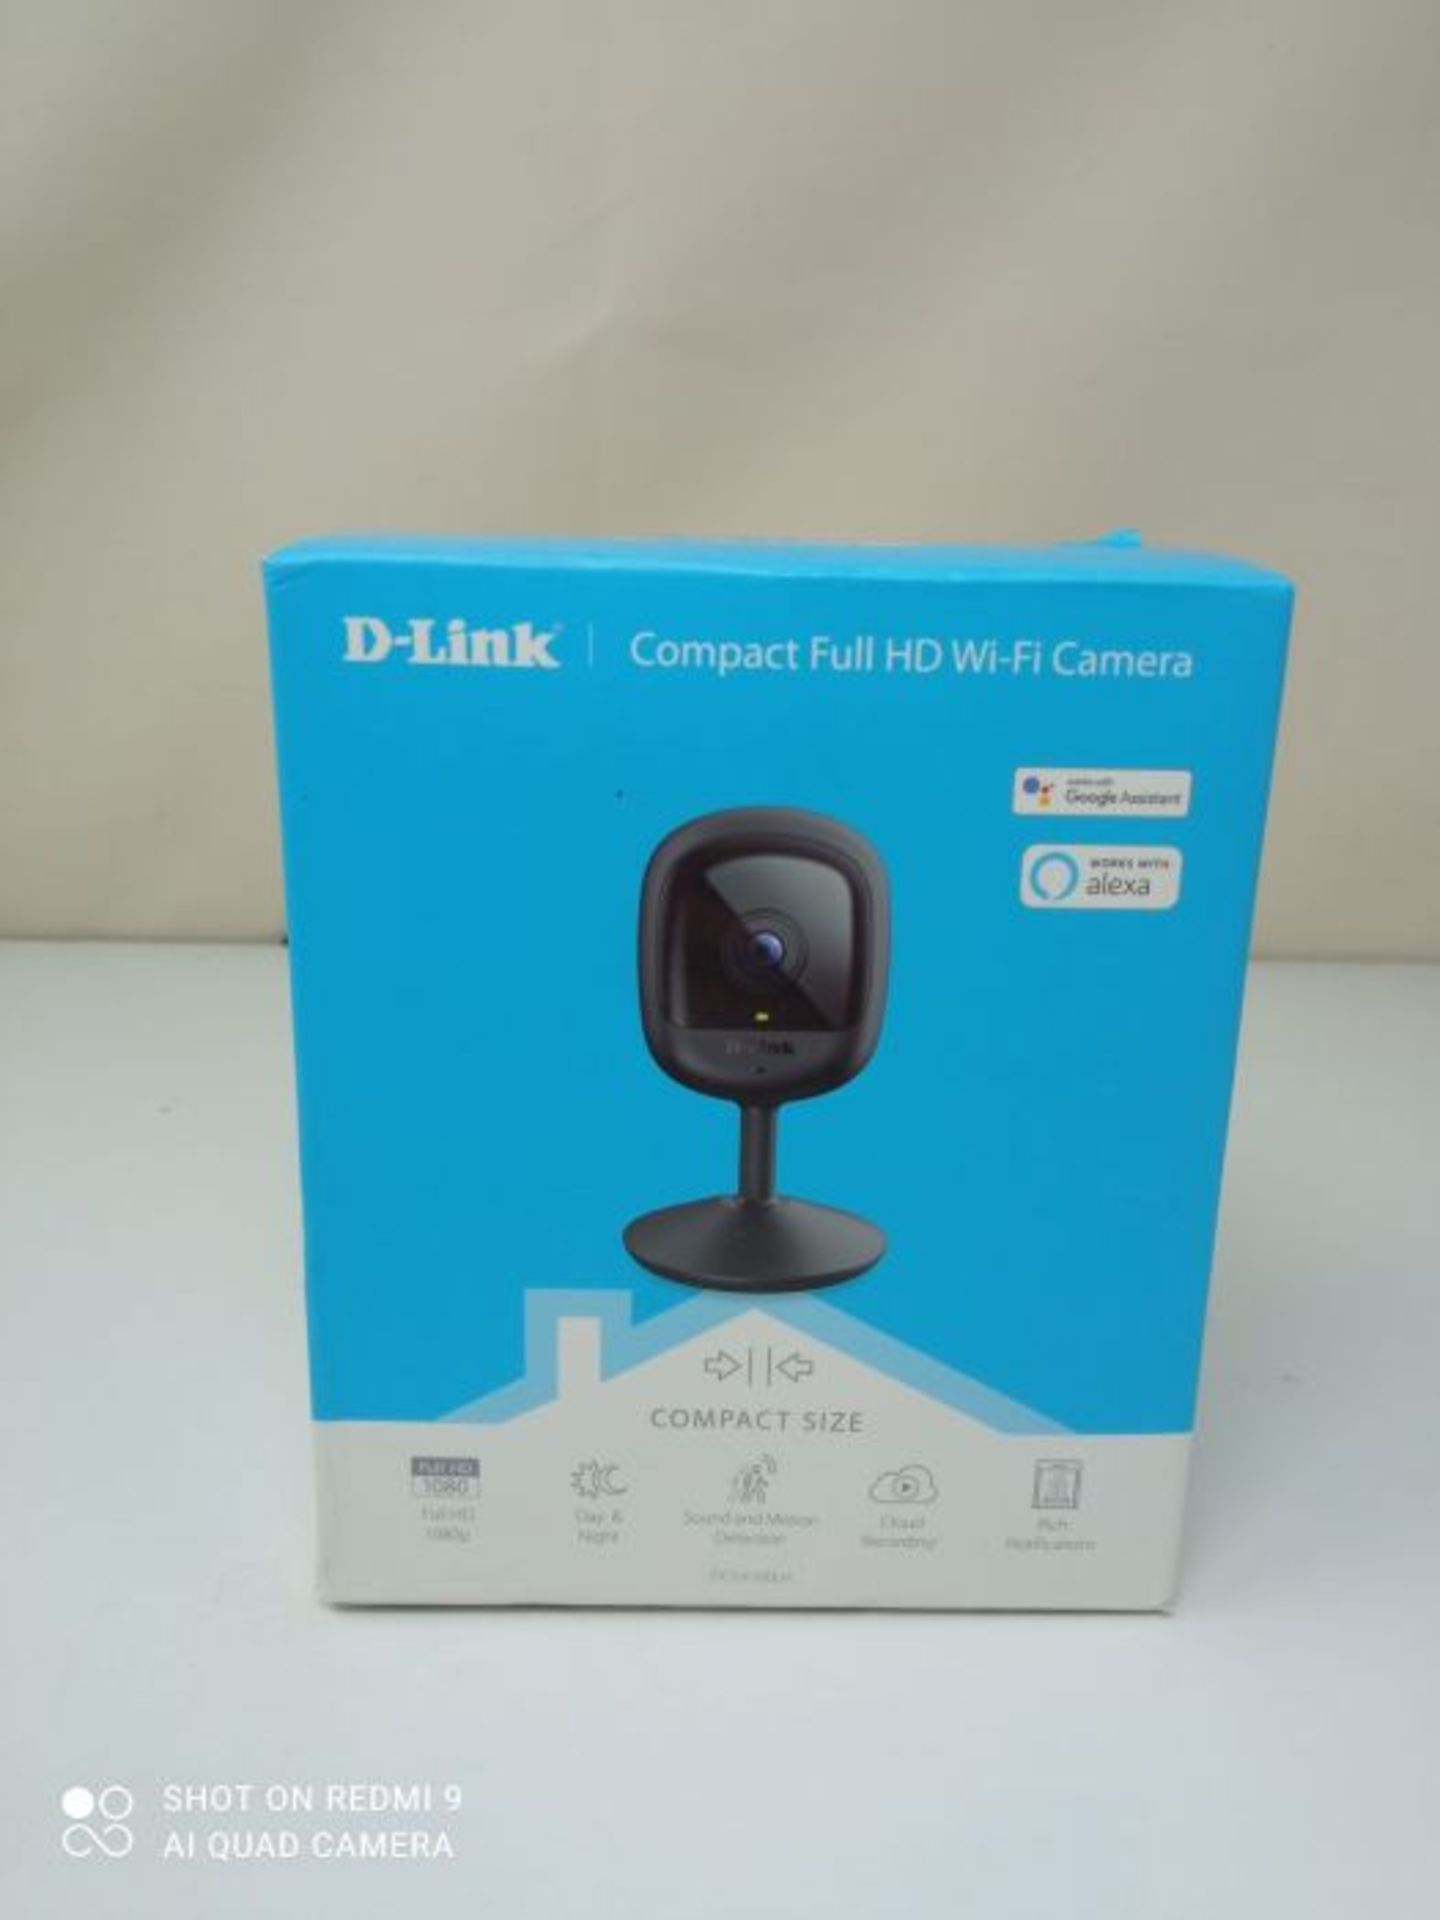 D-Link Compact FHD Wi-Fi Camera - Image 2 of 3